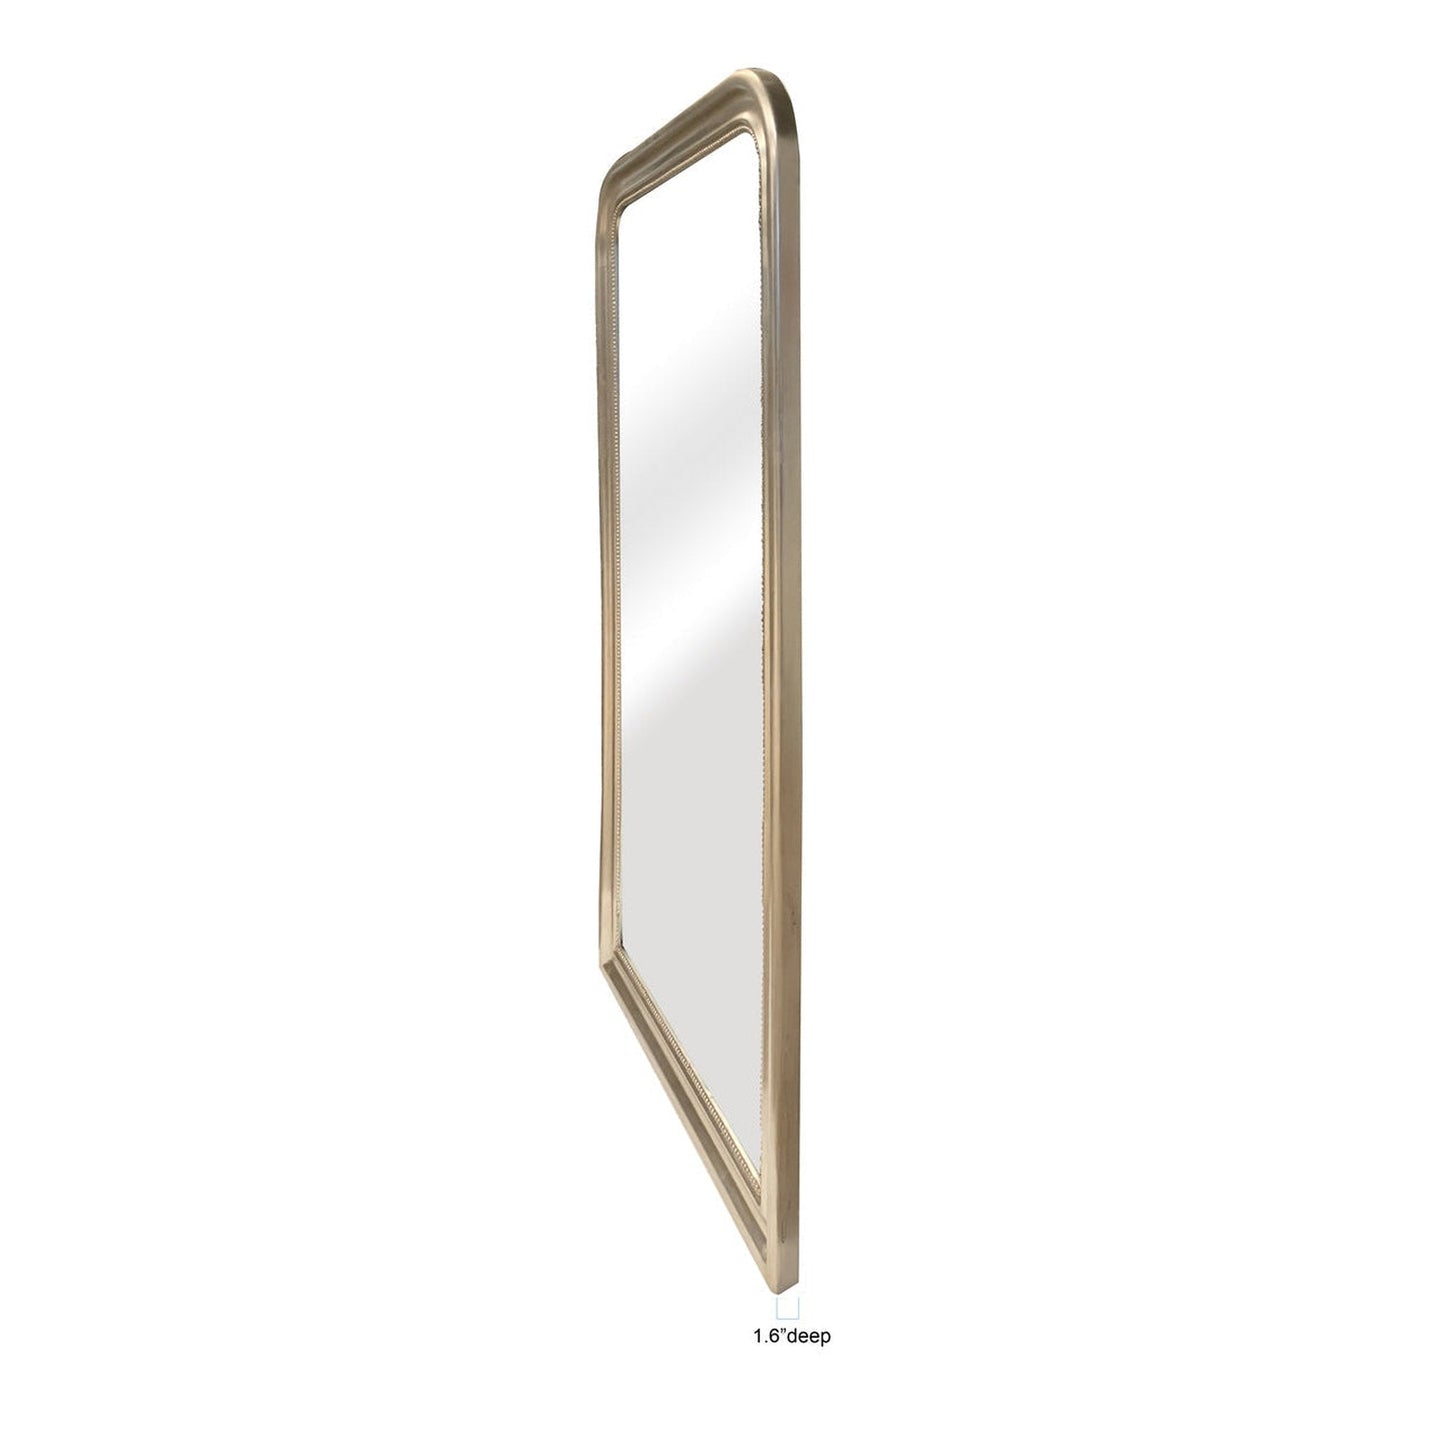 SBC Decor Duparc 31" x 48" Wall-Mounted Arched Wood Frame Accent Mirror In Champagne Gold Finish